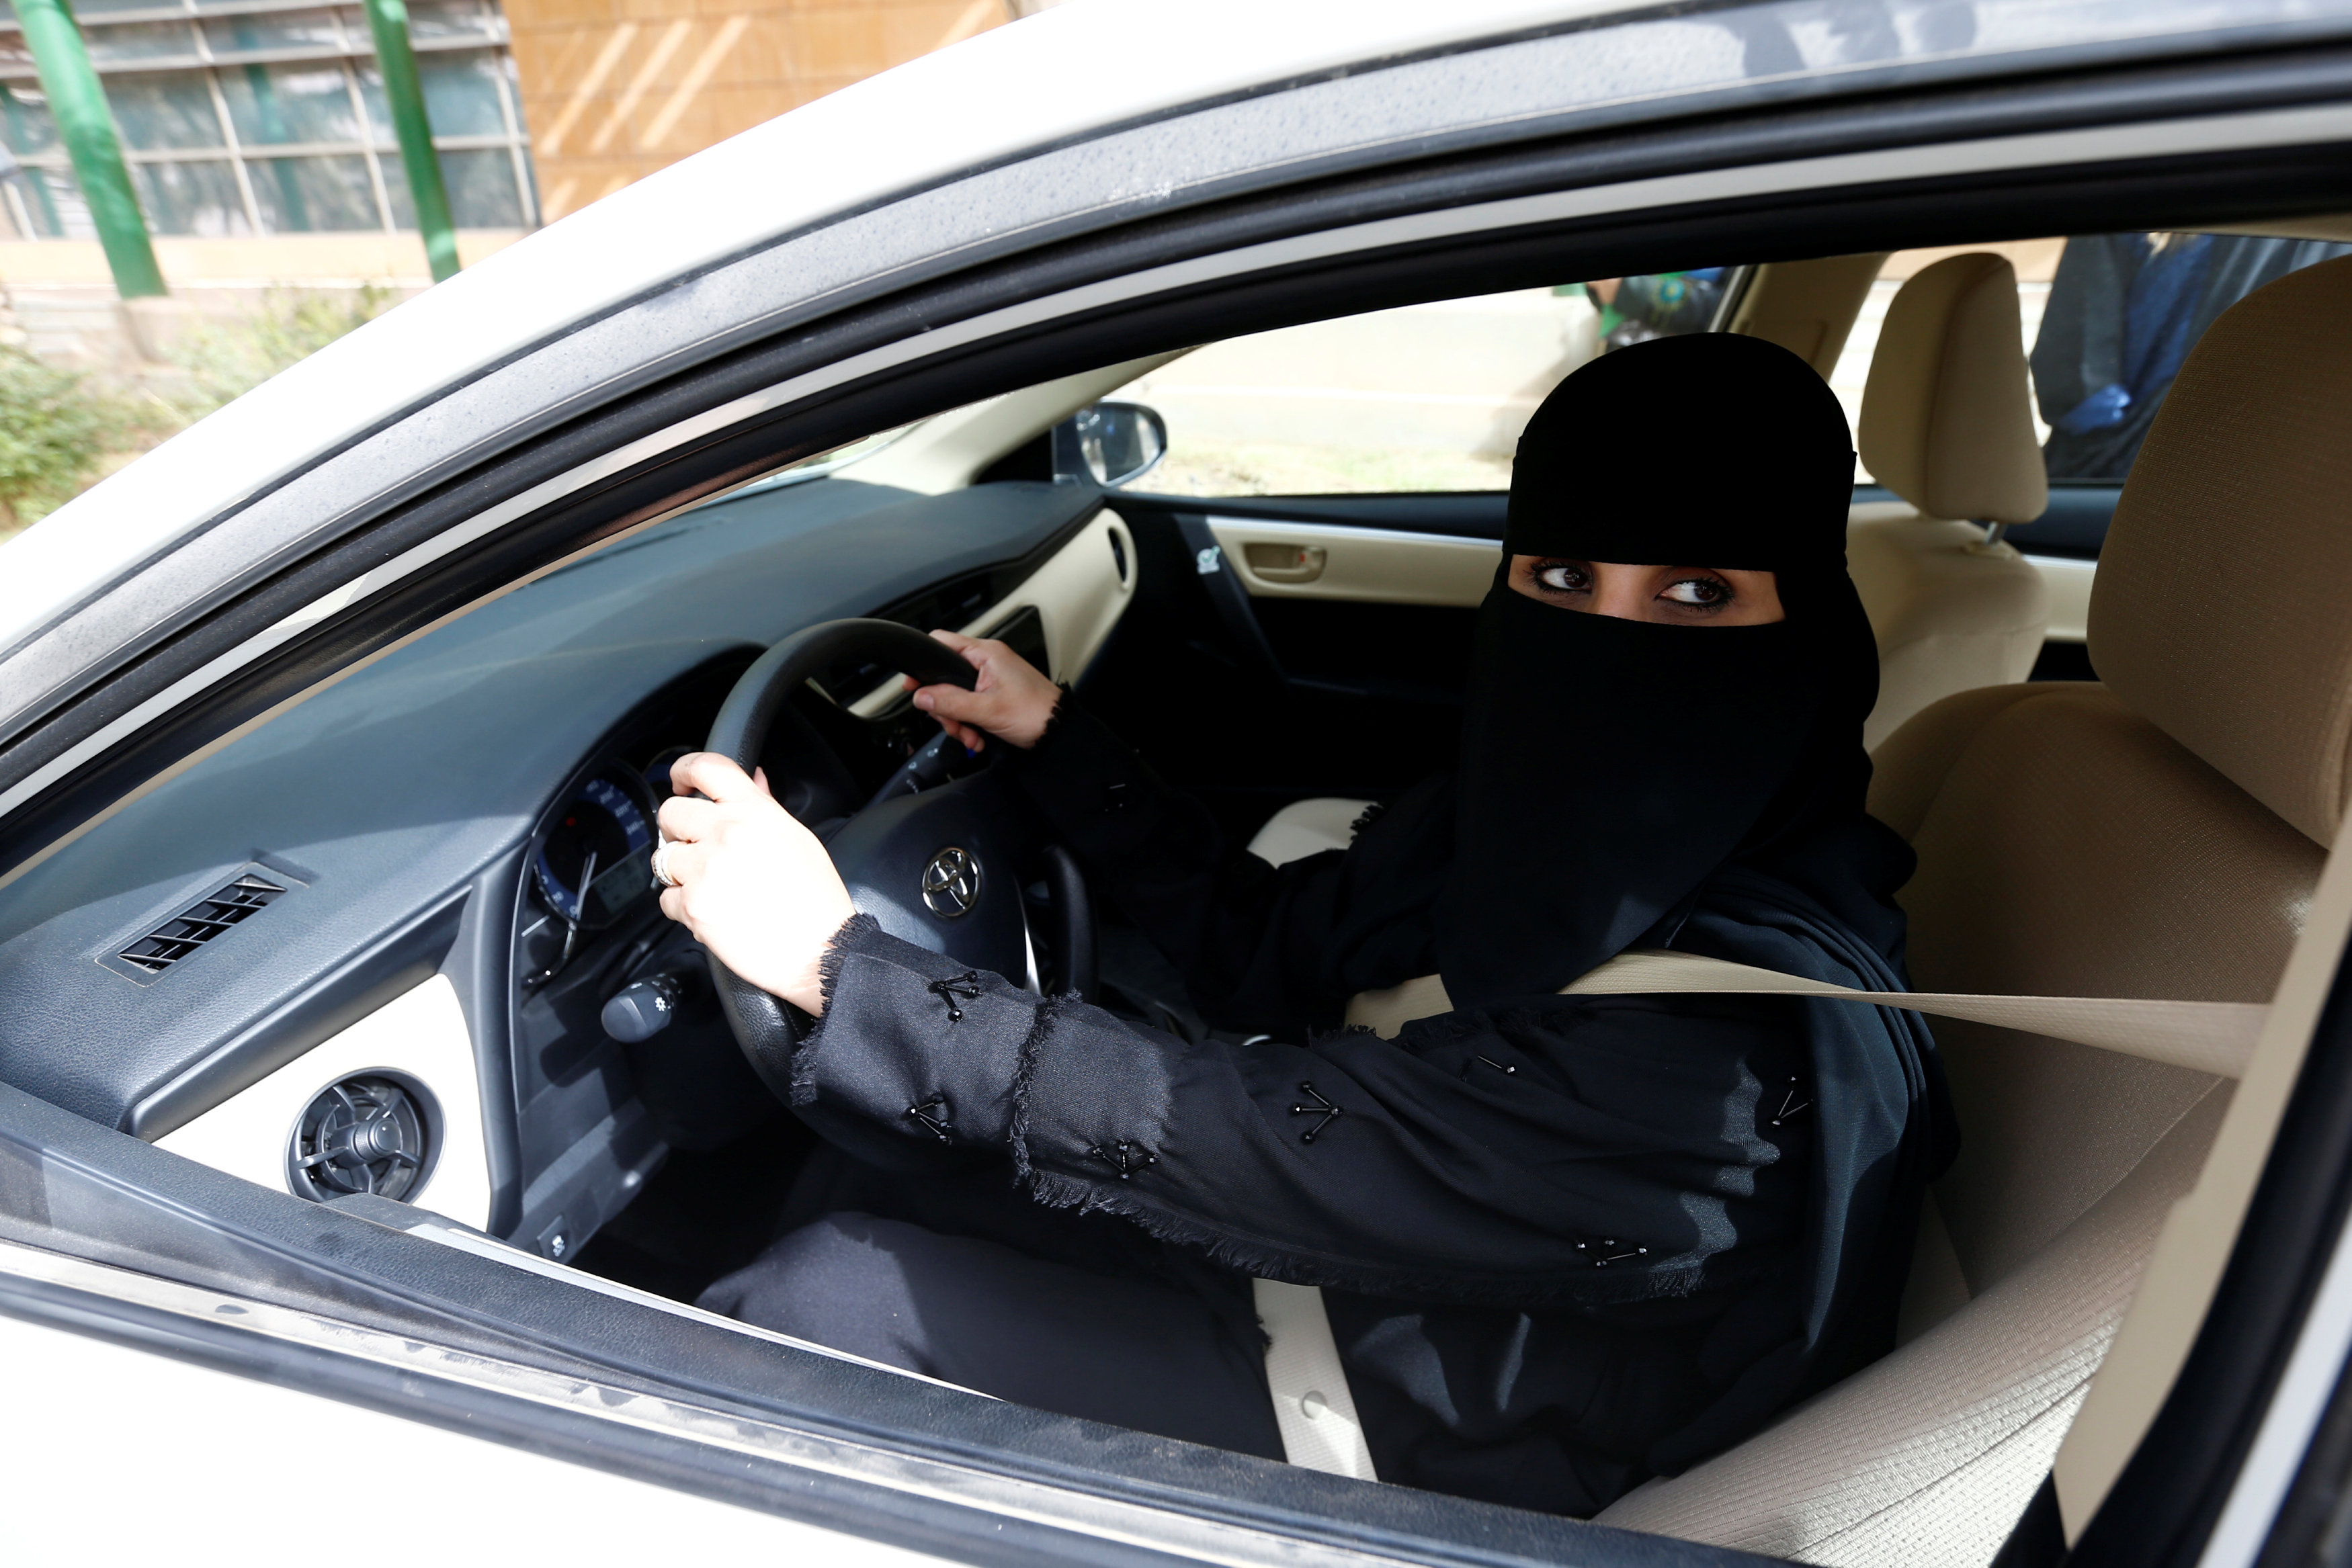 Saudi Women Gear Up For New Freedom As Driving Ban Ends Times Of Oman